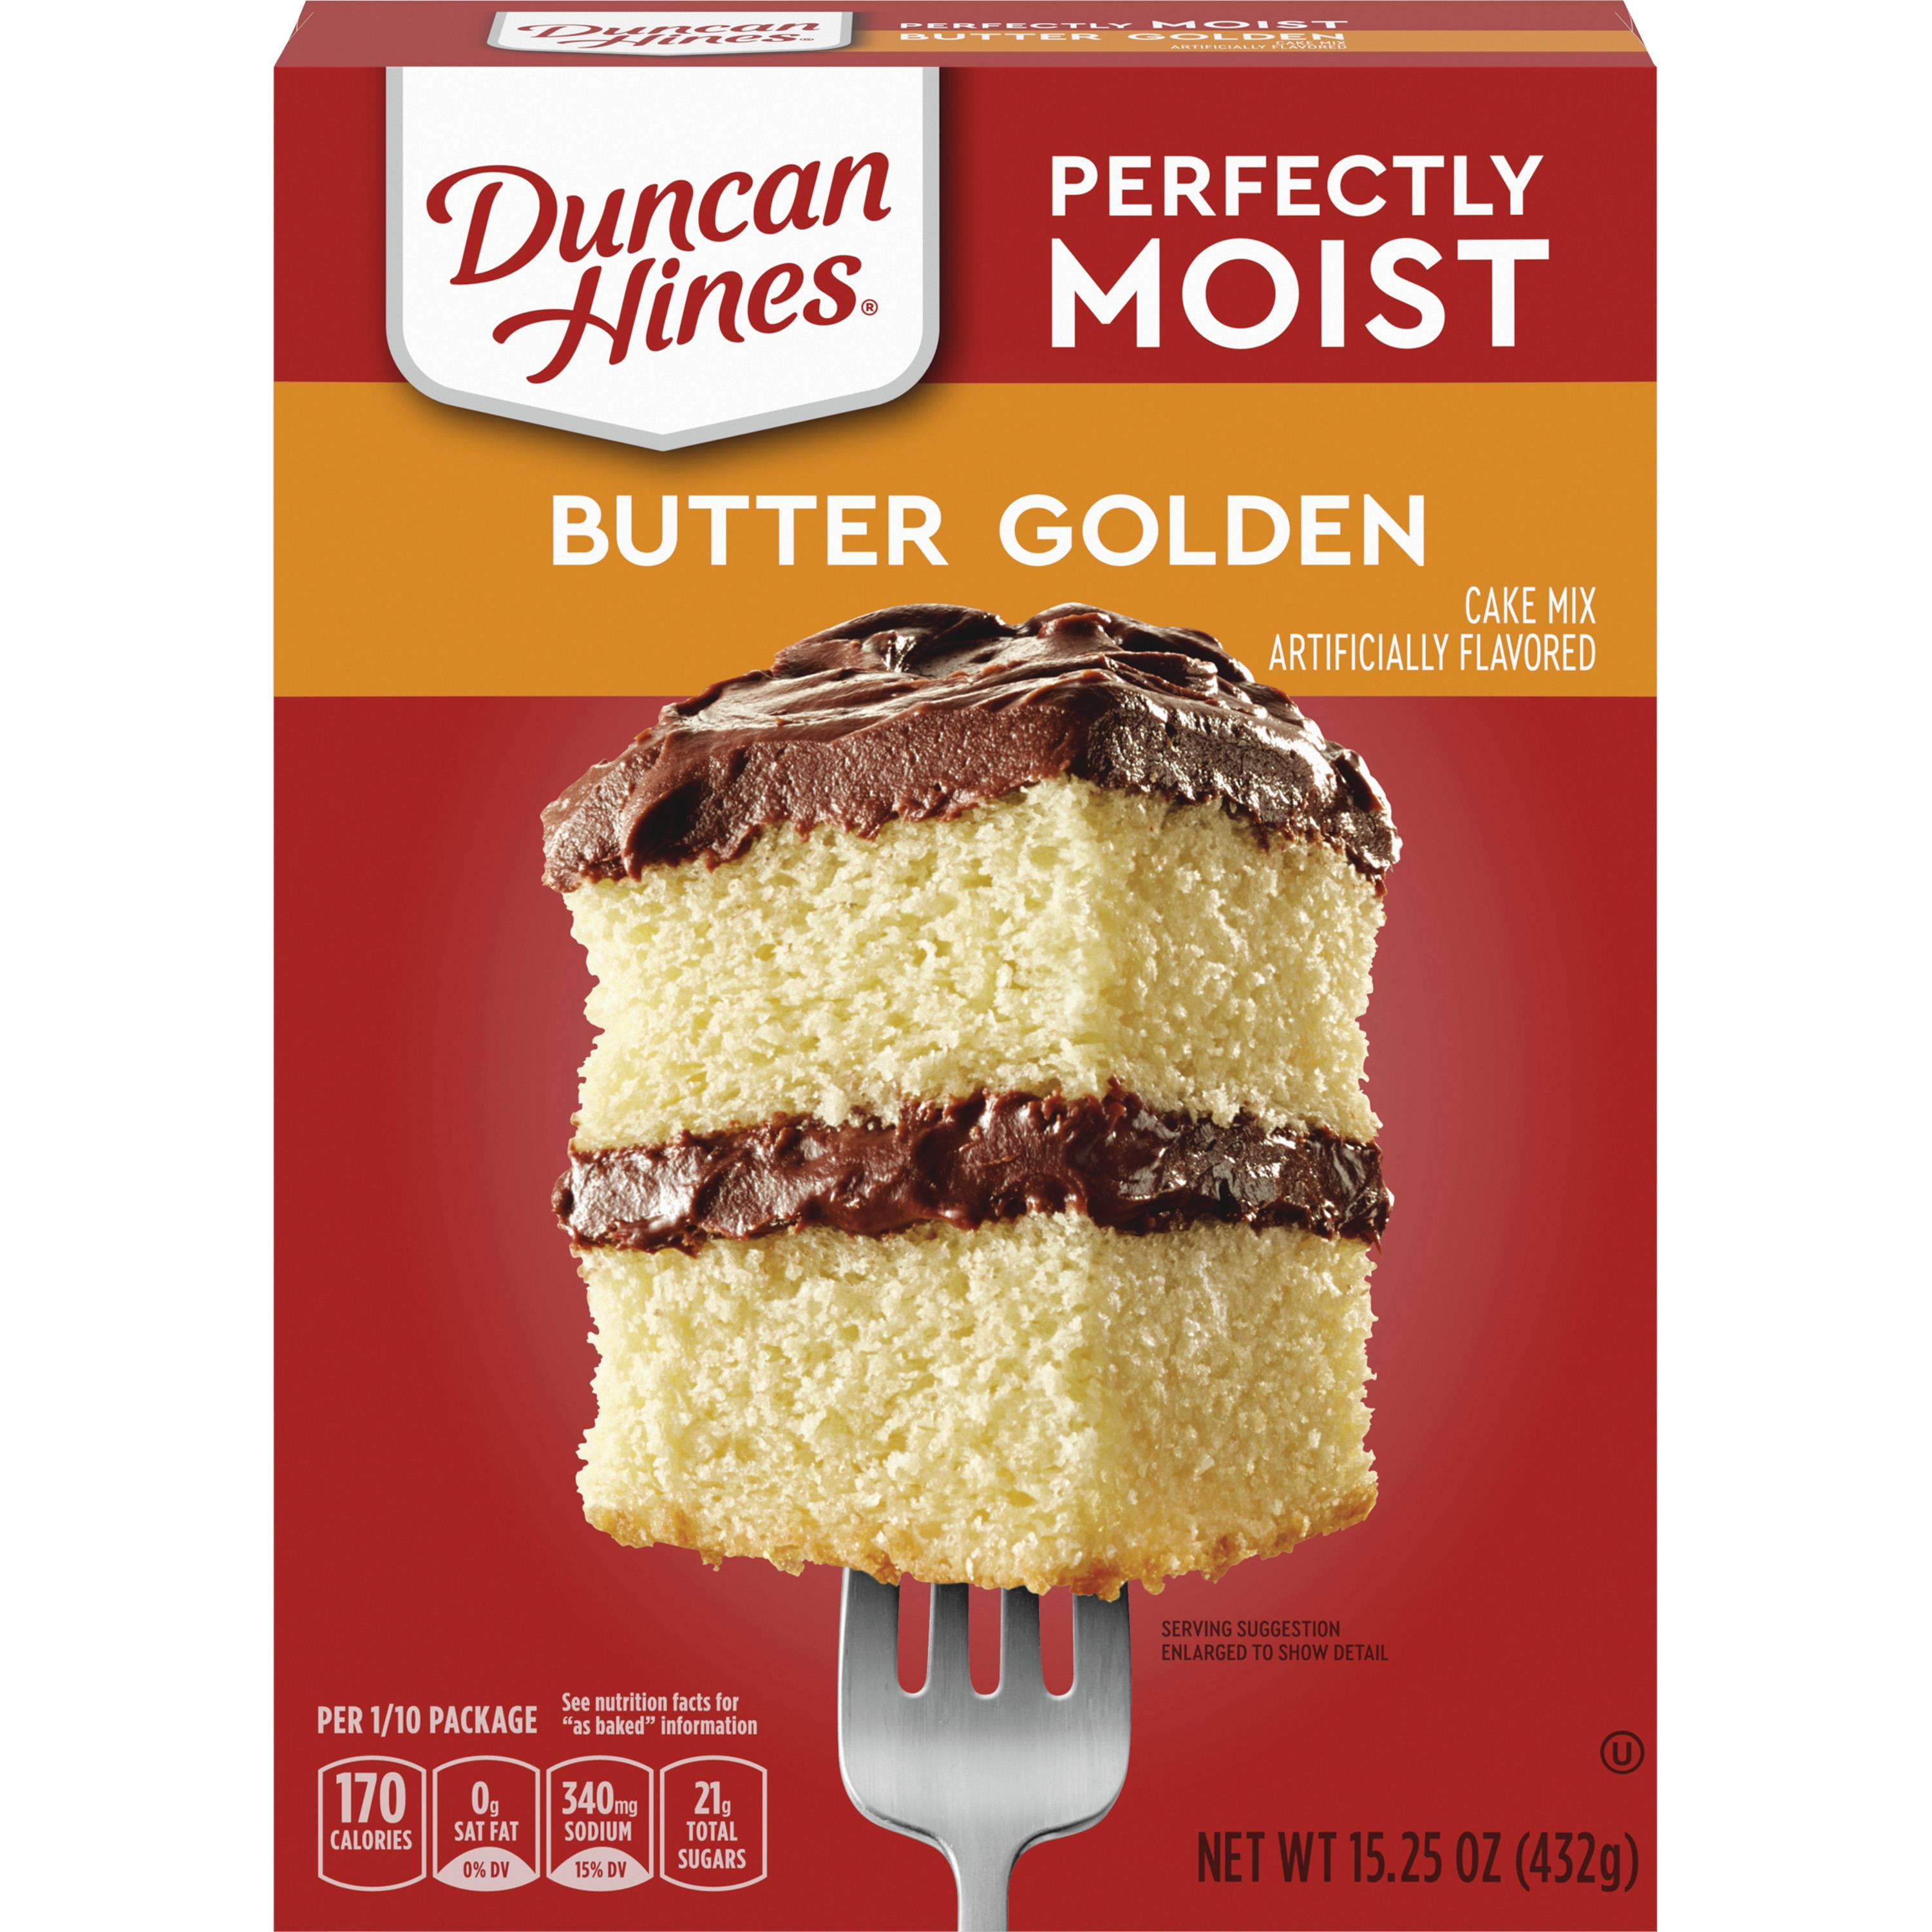 Doctored Yellow Cake Mix - Confessions of a Baking Queen